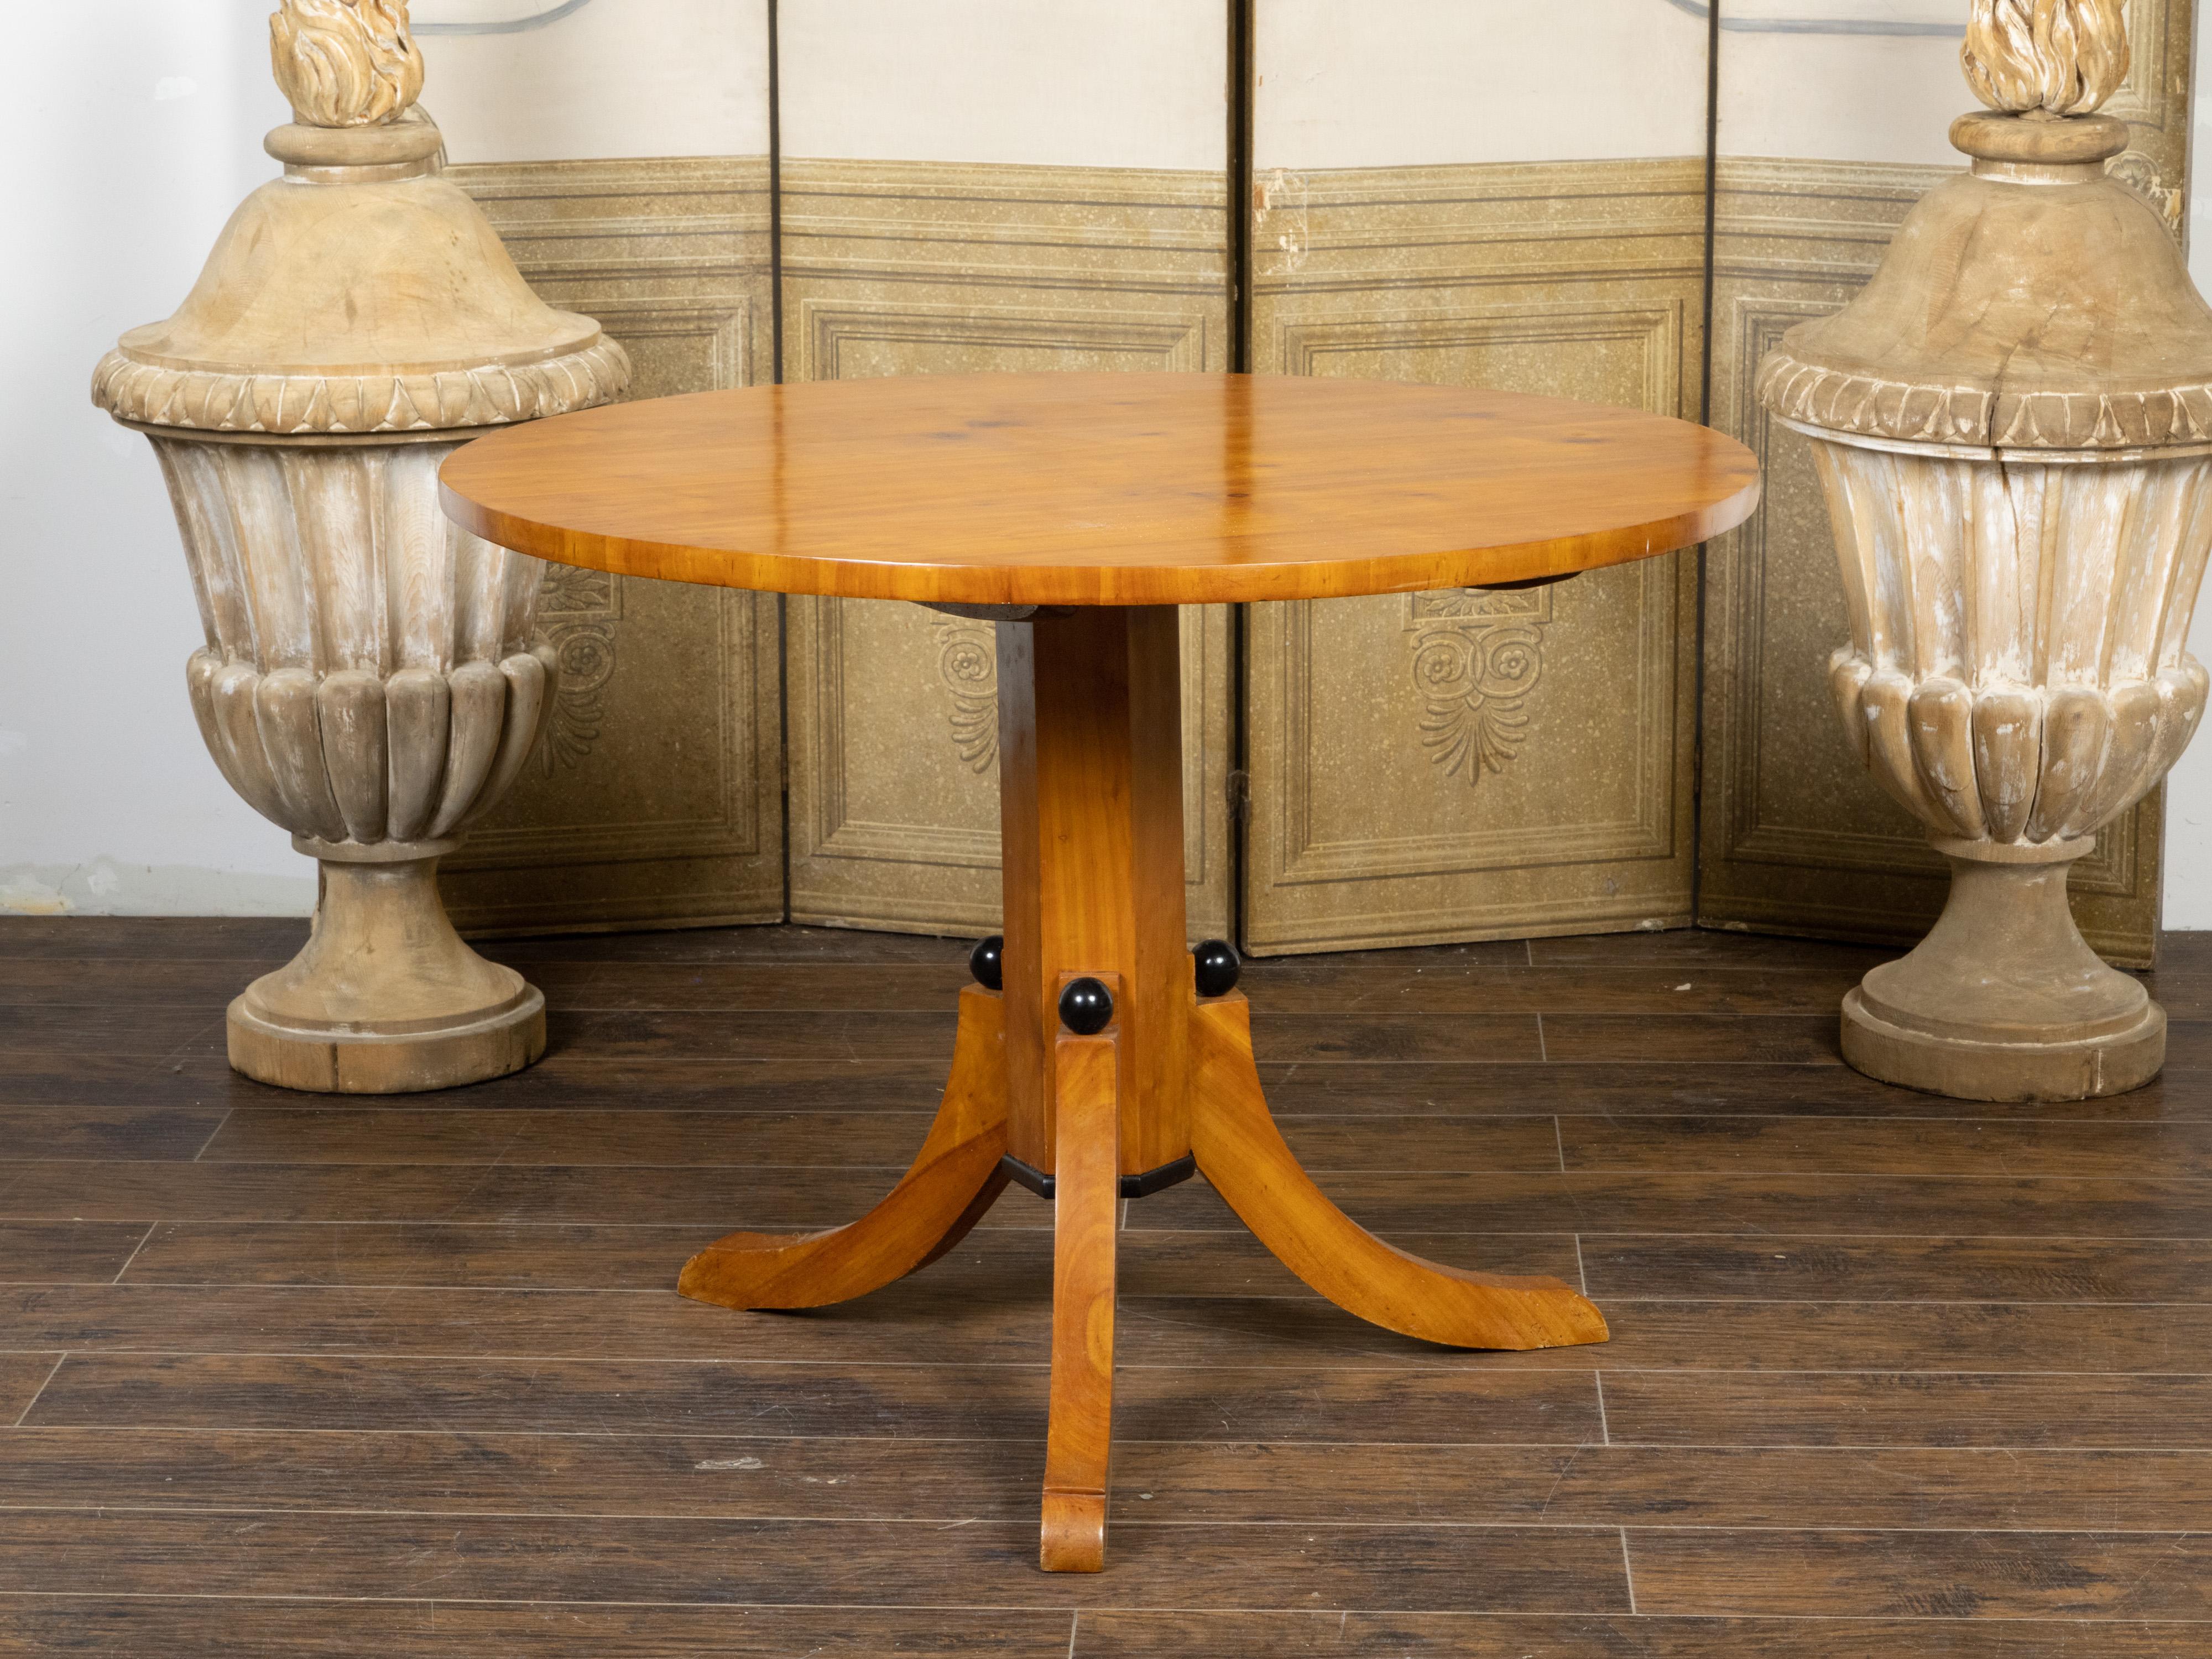 An Austrian Biedermeier period pine center table from the 19th century, with circular top, pedestal, tripod base and black ebonized spheres. Created in Austria during the Biedermeier period, this pine center table features a round top sitting above